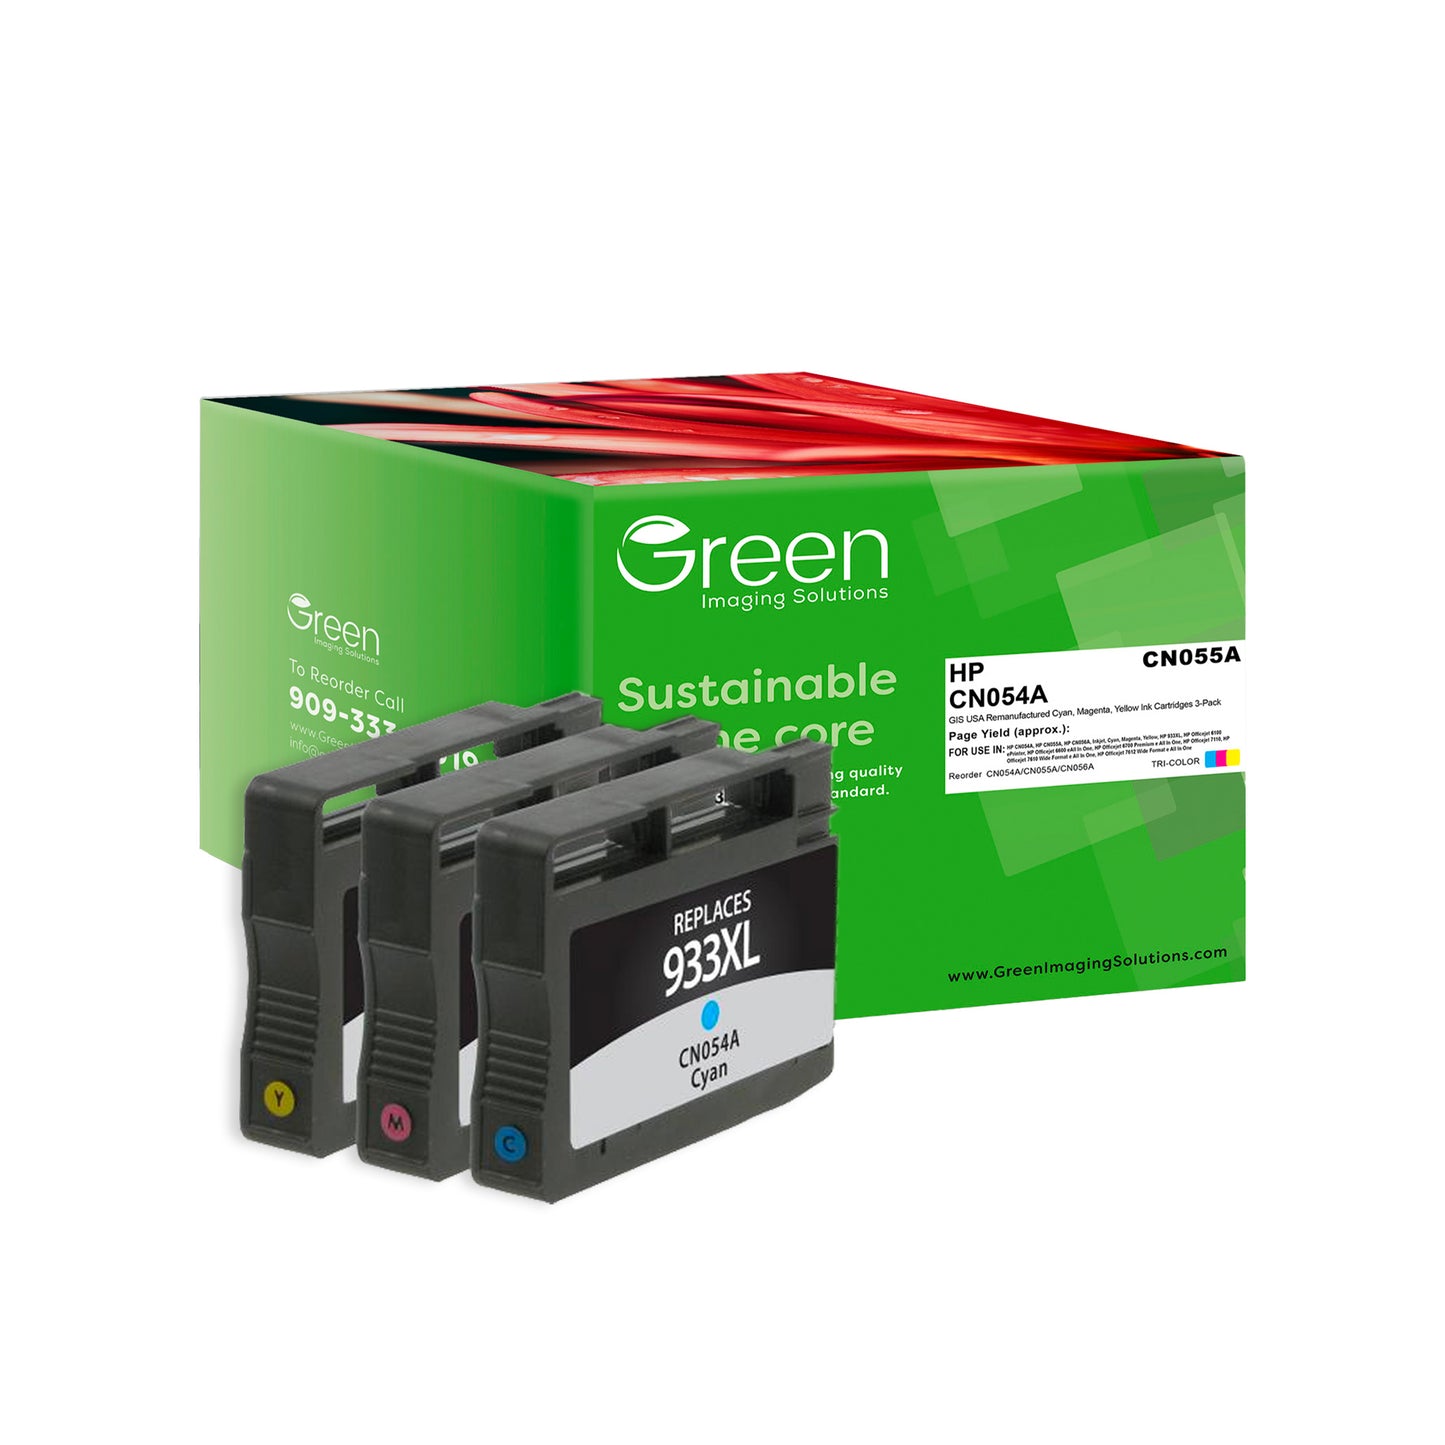 Green Imaging Solutions USA Remanufactured Cyan, Magenta, Yellow Ink Cartridges for HP 933XL 3-Pack